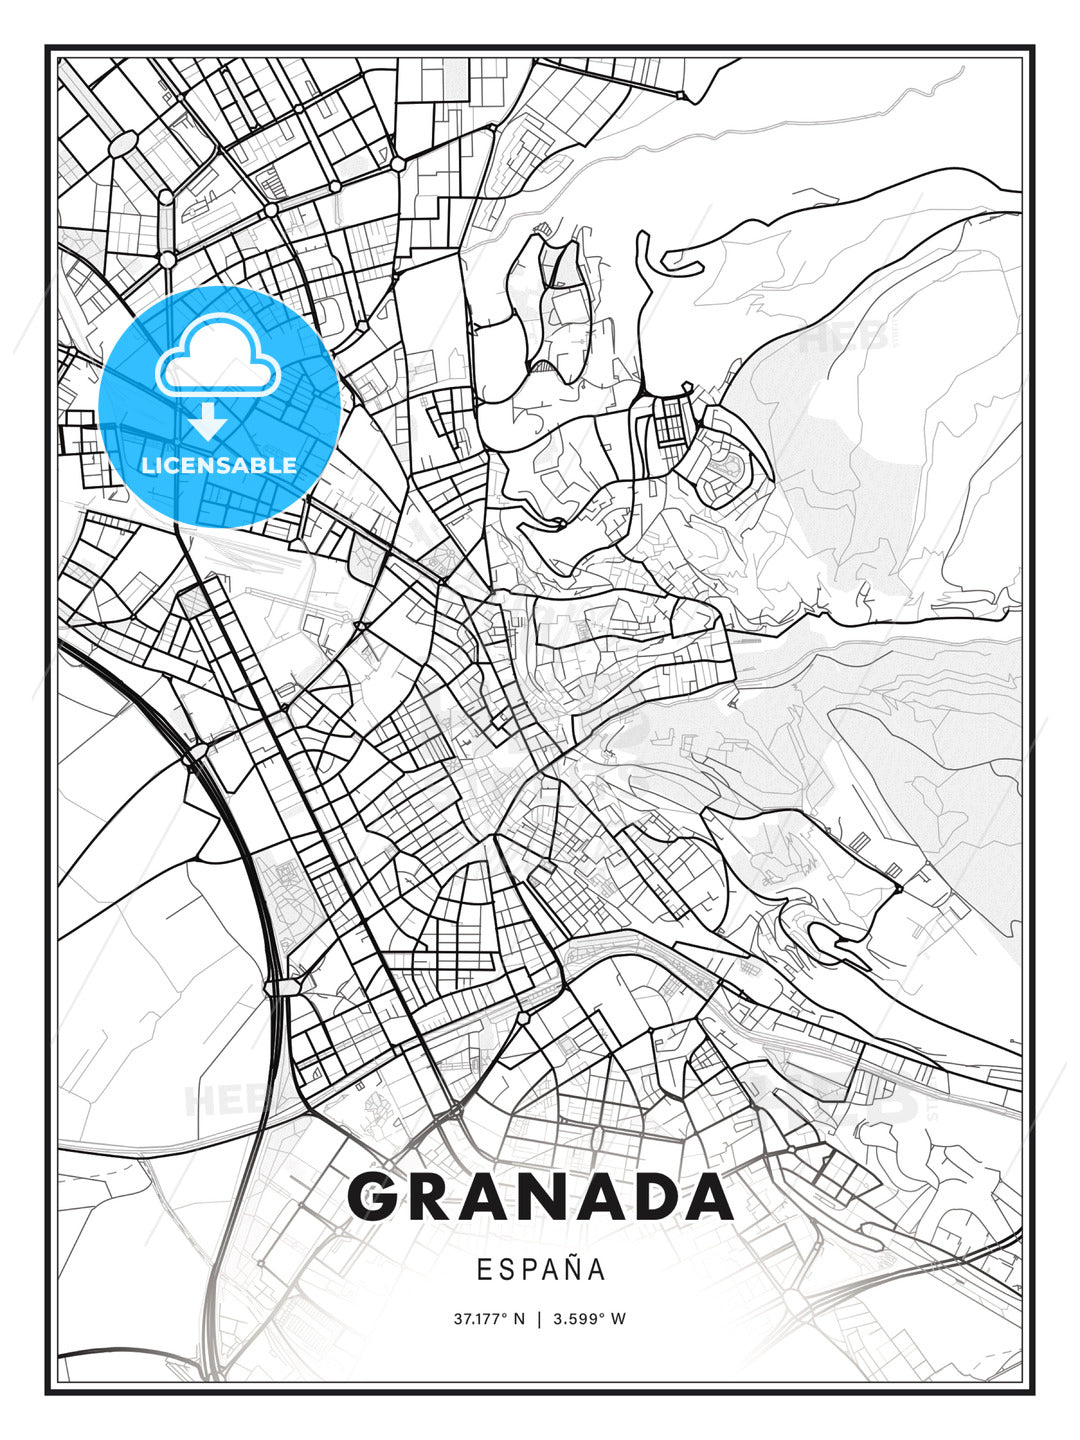 Granada, Spain, Modern Print Template in Various Formats - HEBSTREITS Sketches